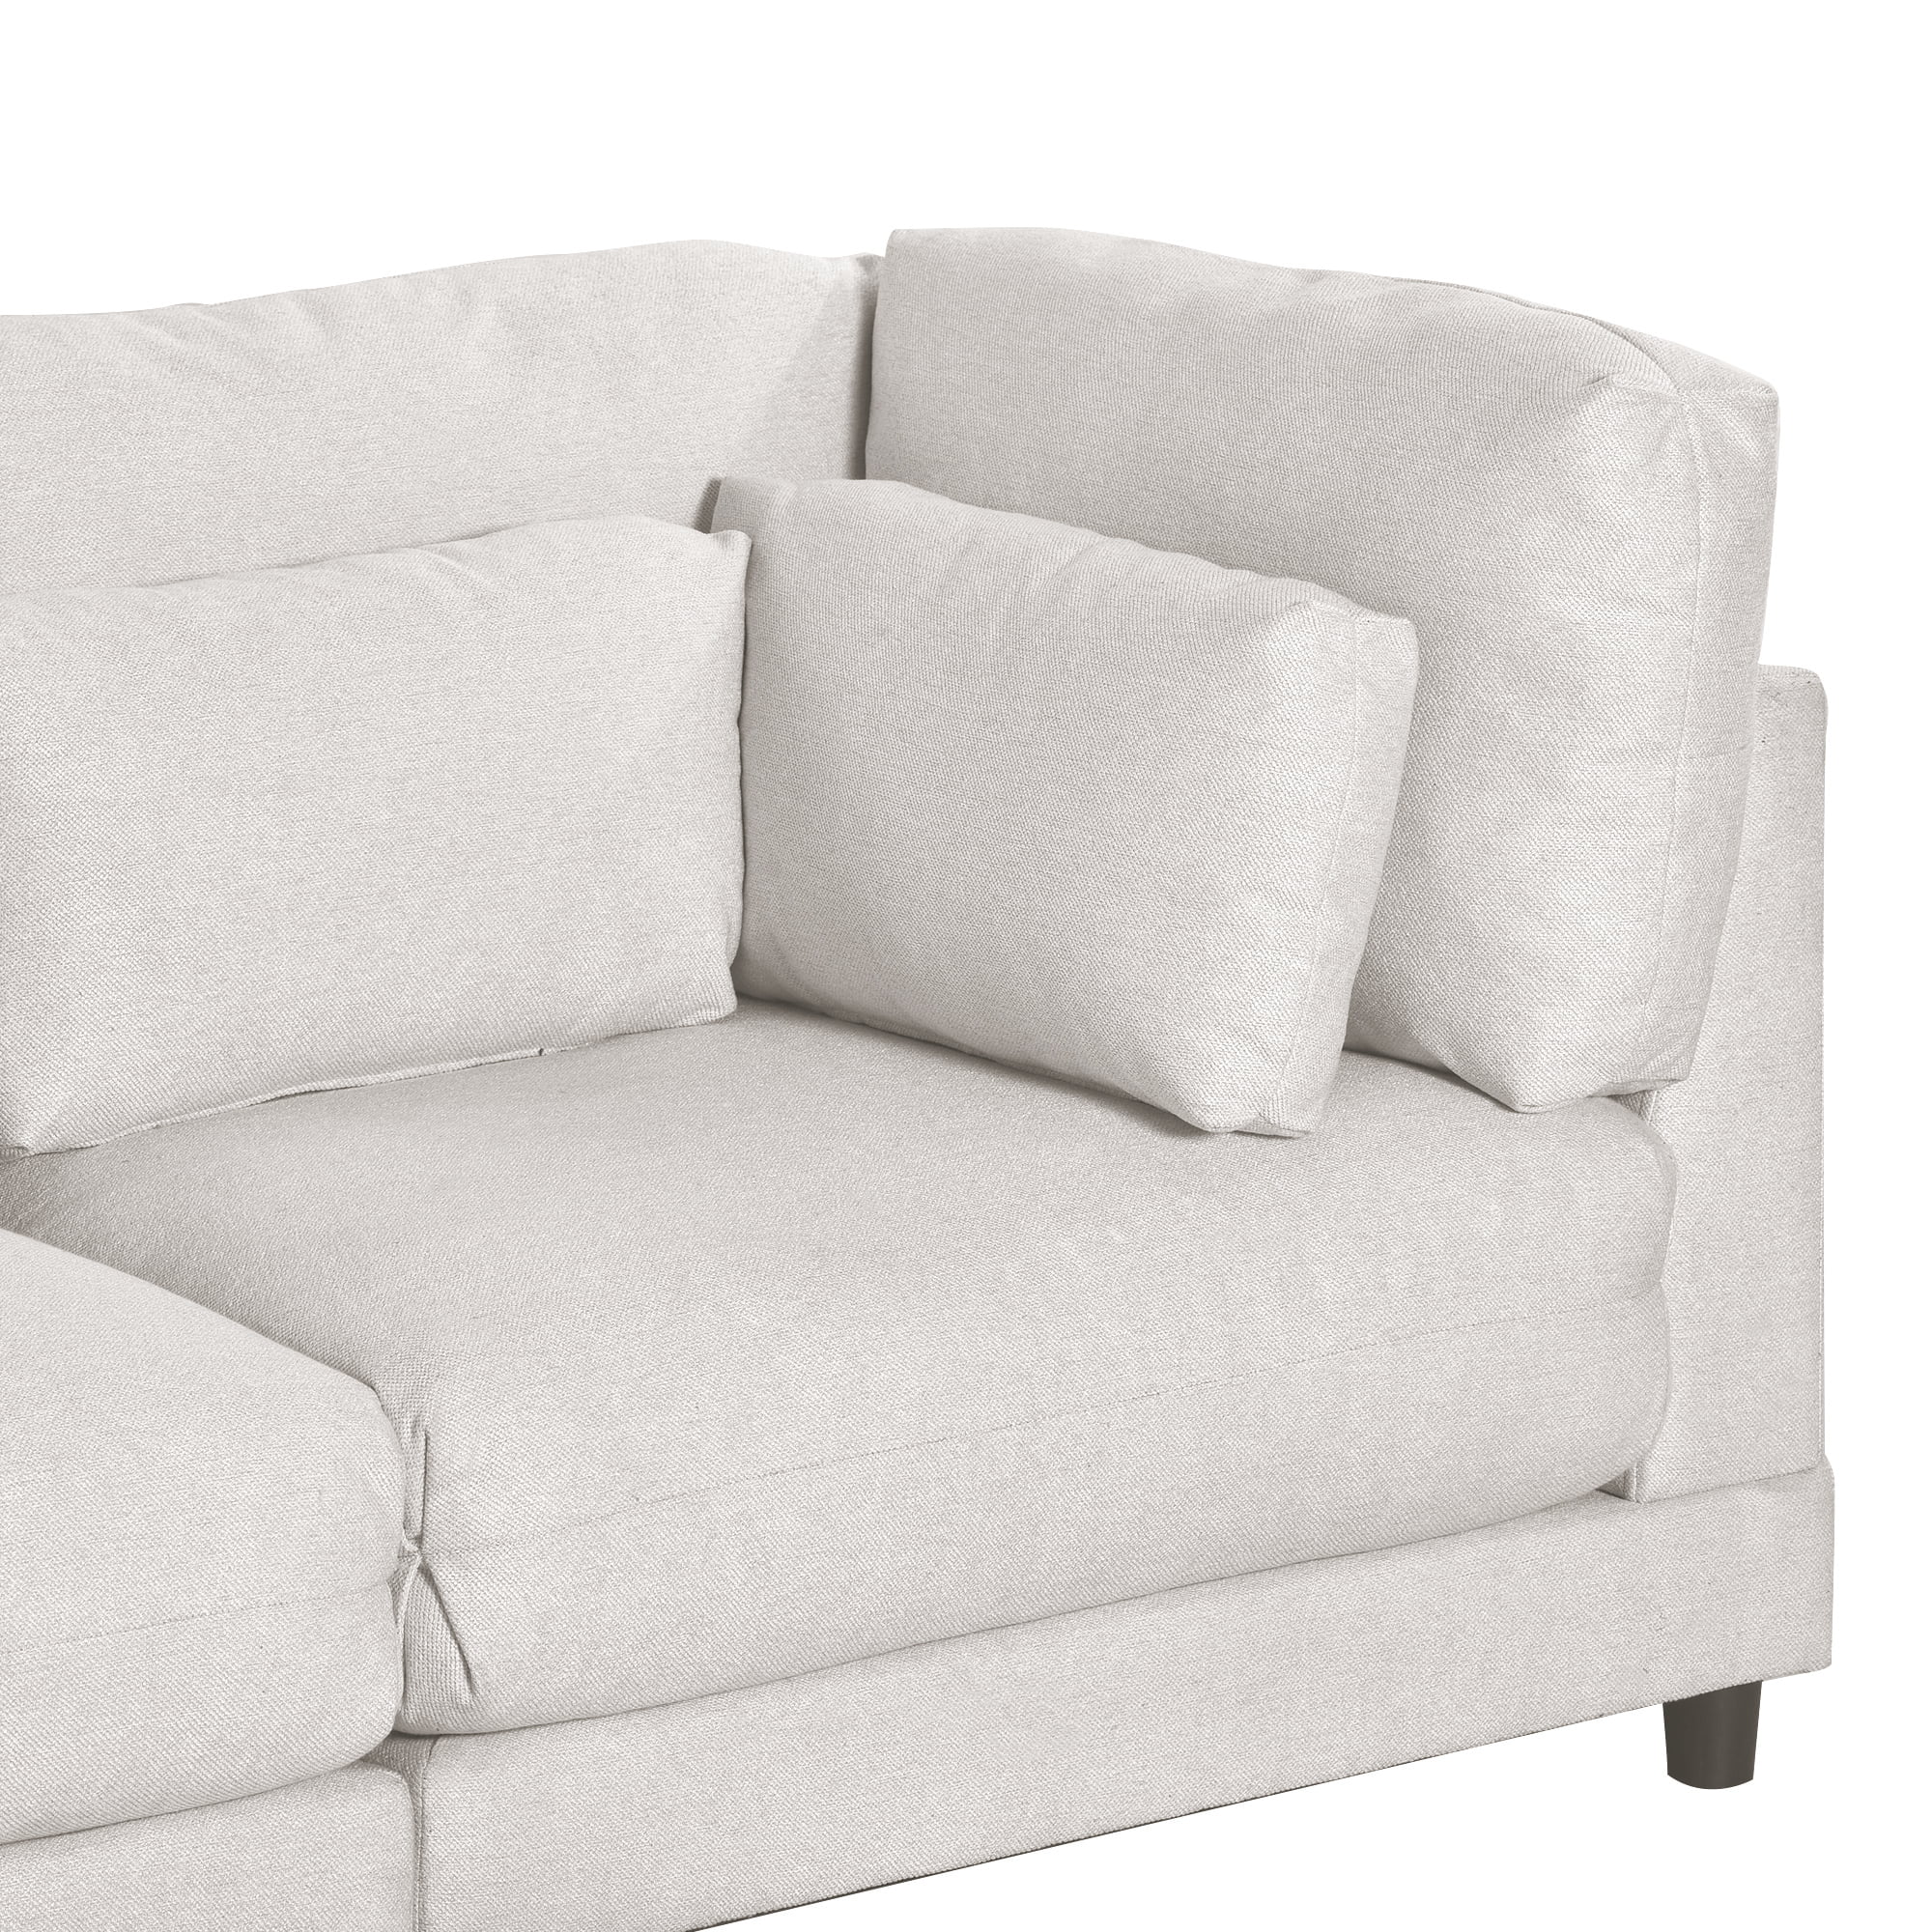 2 Pieces L Shaped Sofa With Removable Ottomans And Comfortable Waist Pillows - WY000328AAA